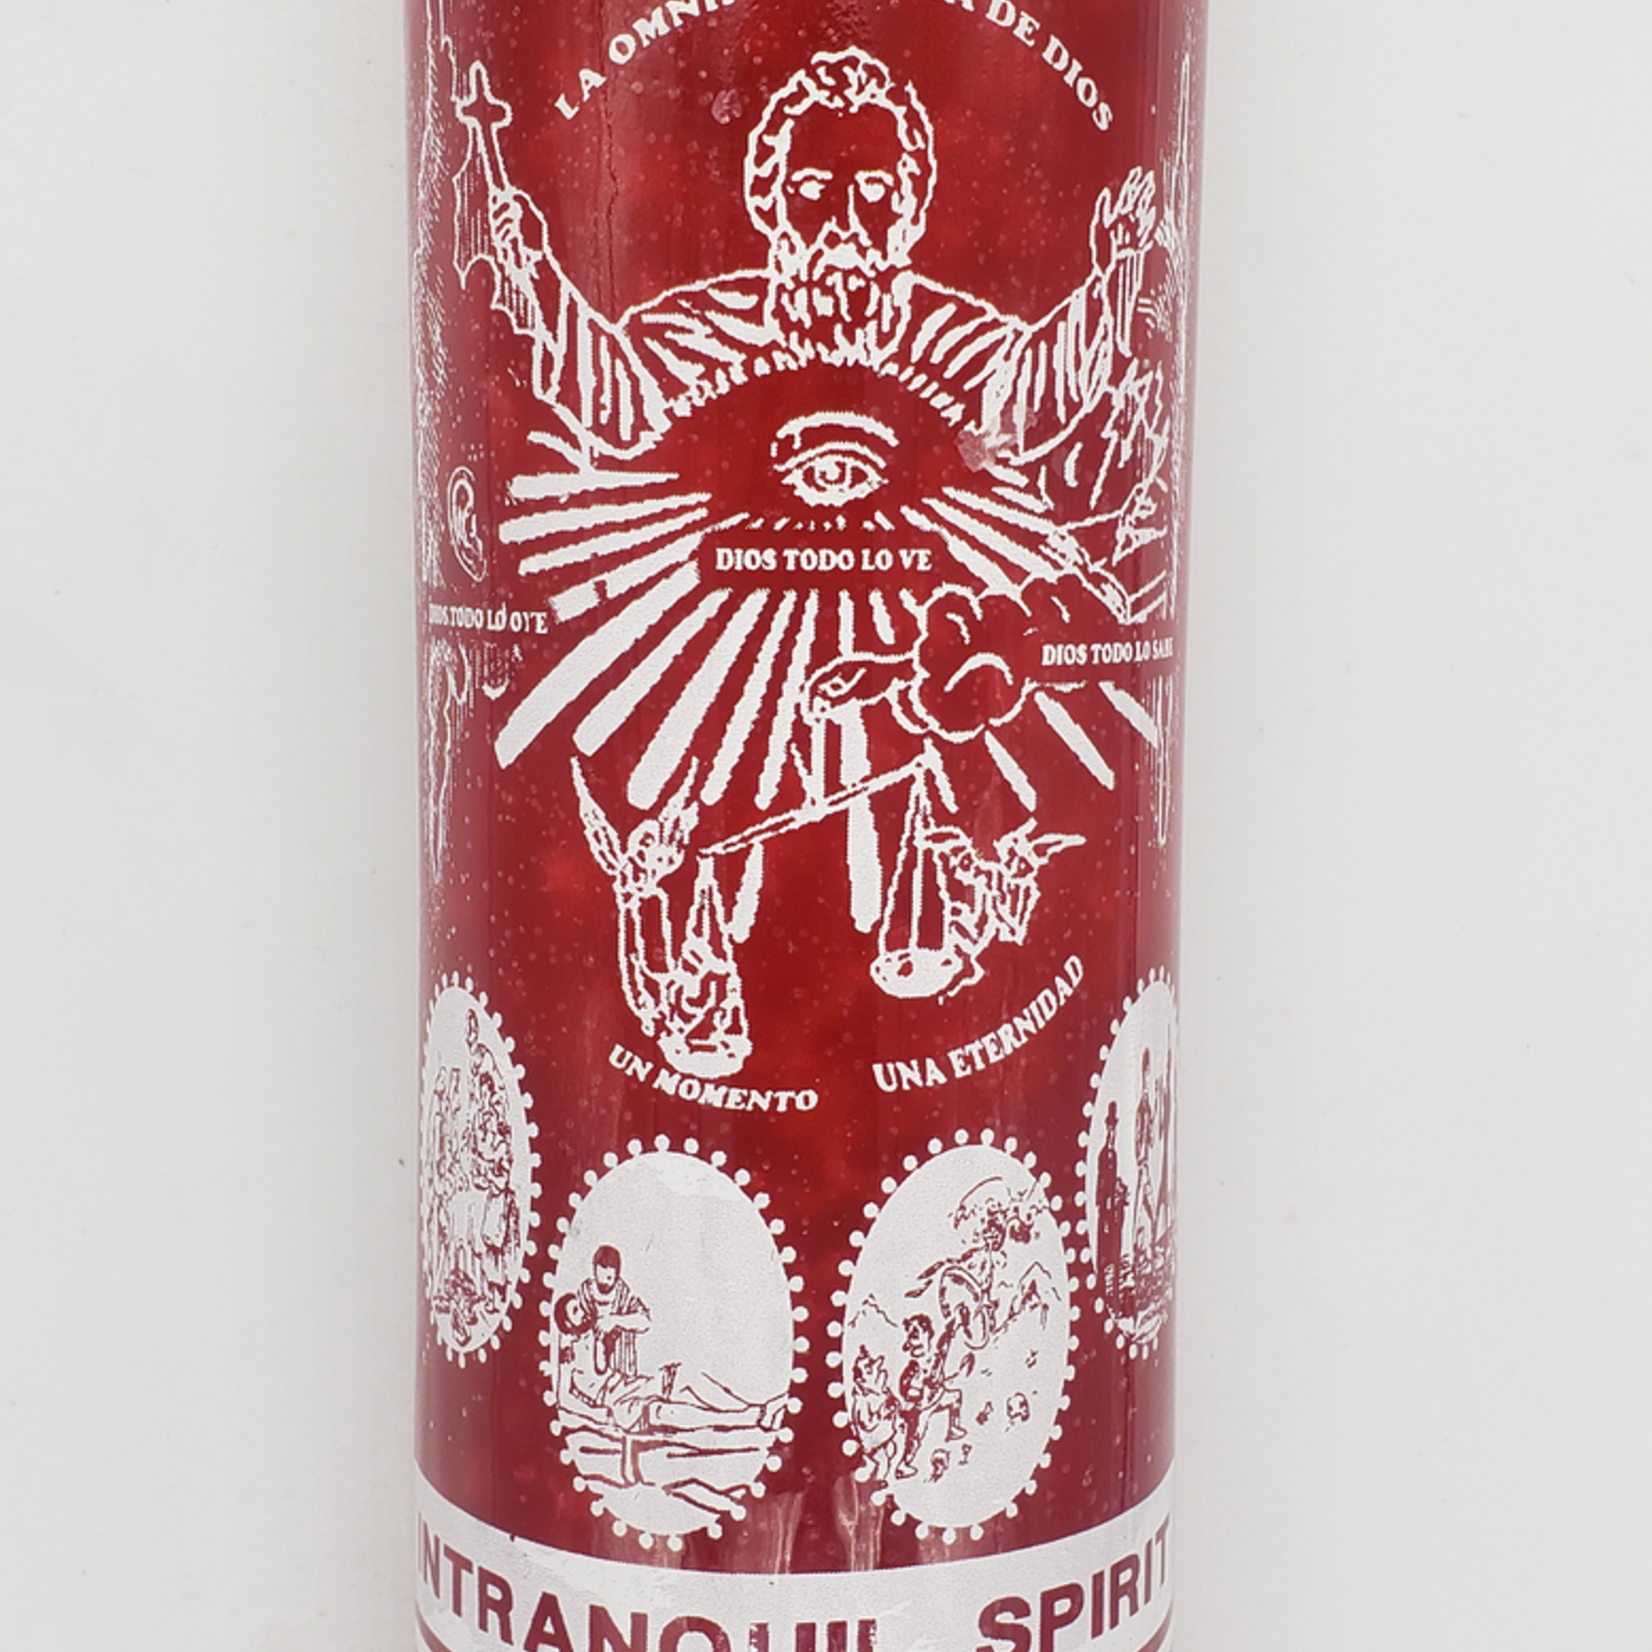 The Intranquil Spirit 7 day Candle